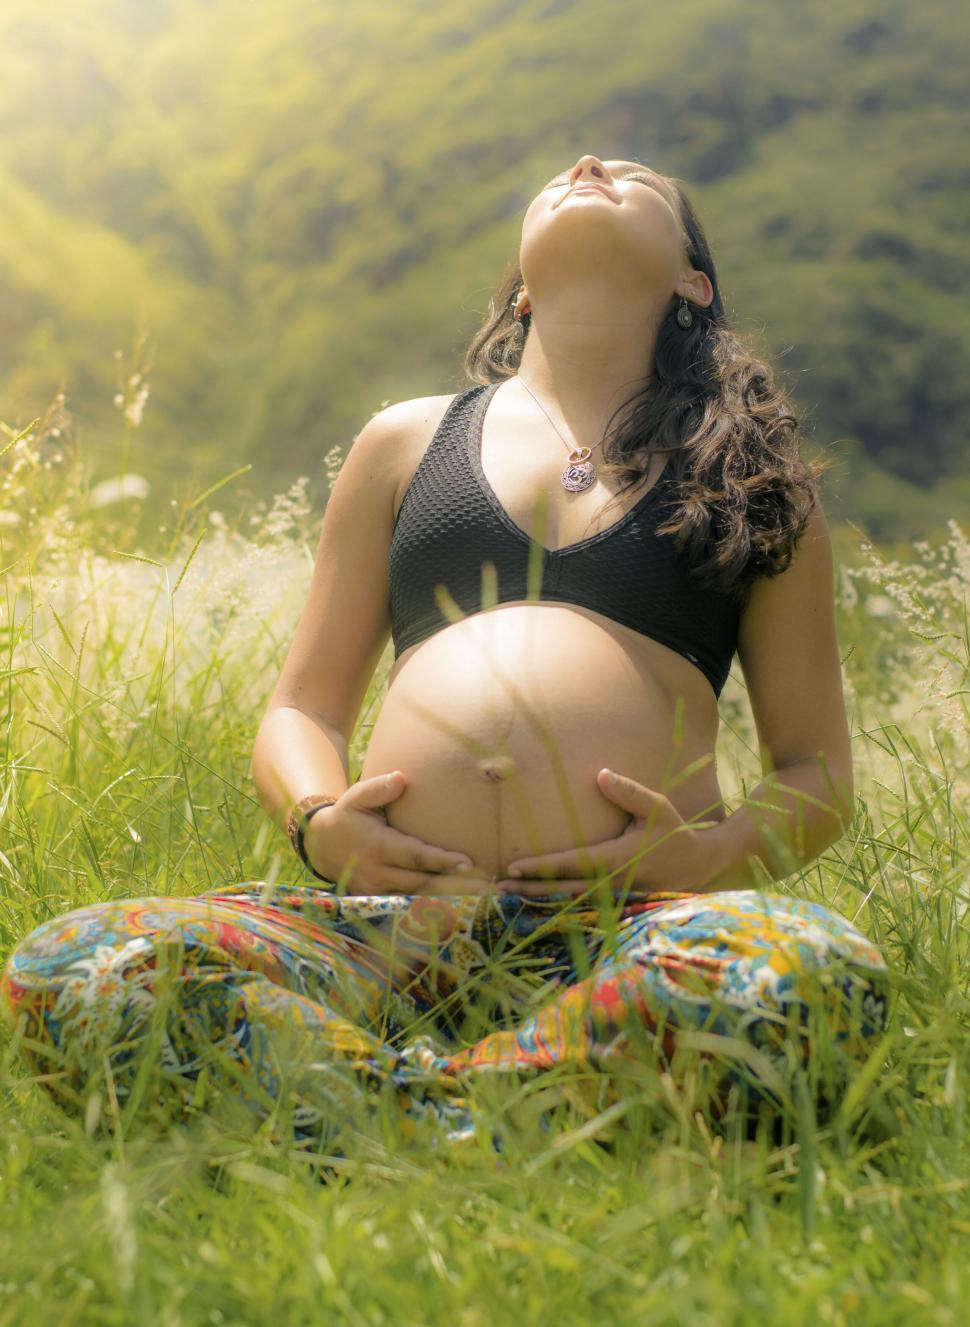 Free Image of Pregnant woman meditating in grassy field 